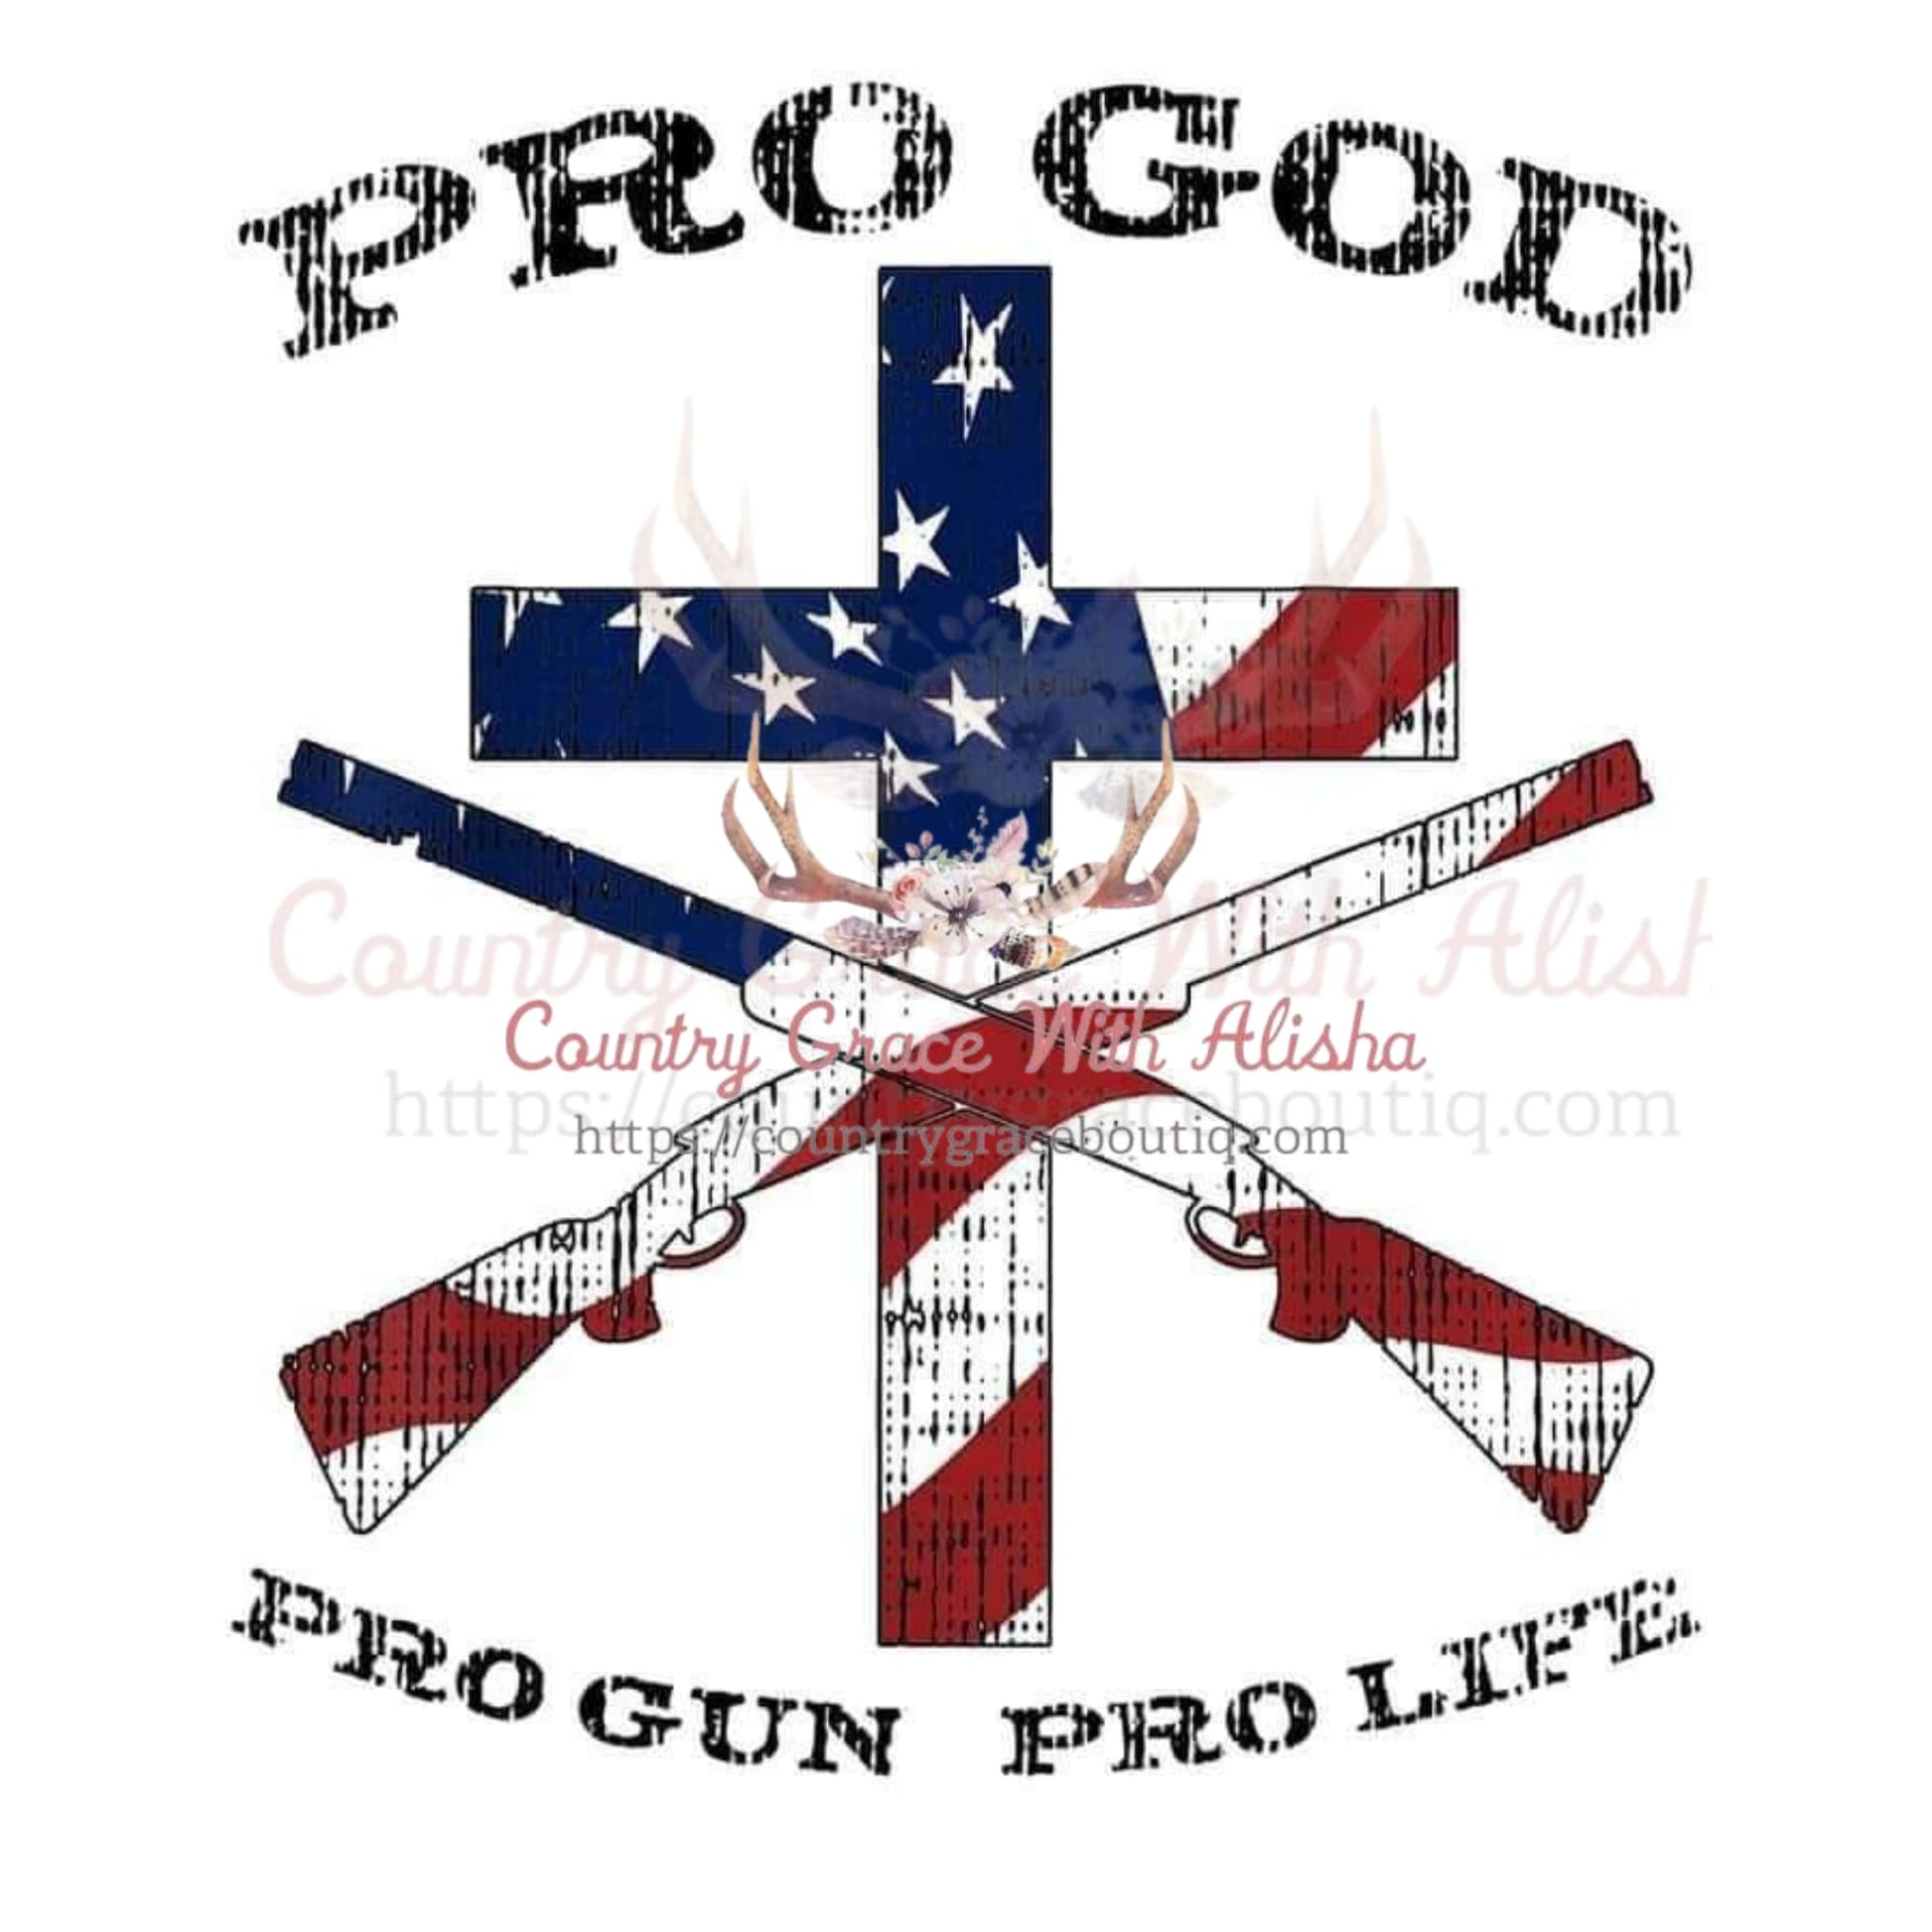 Pro Gun Sublimation Transfer - Sub $1.50 Country Grace With 